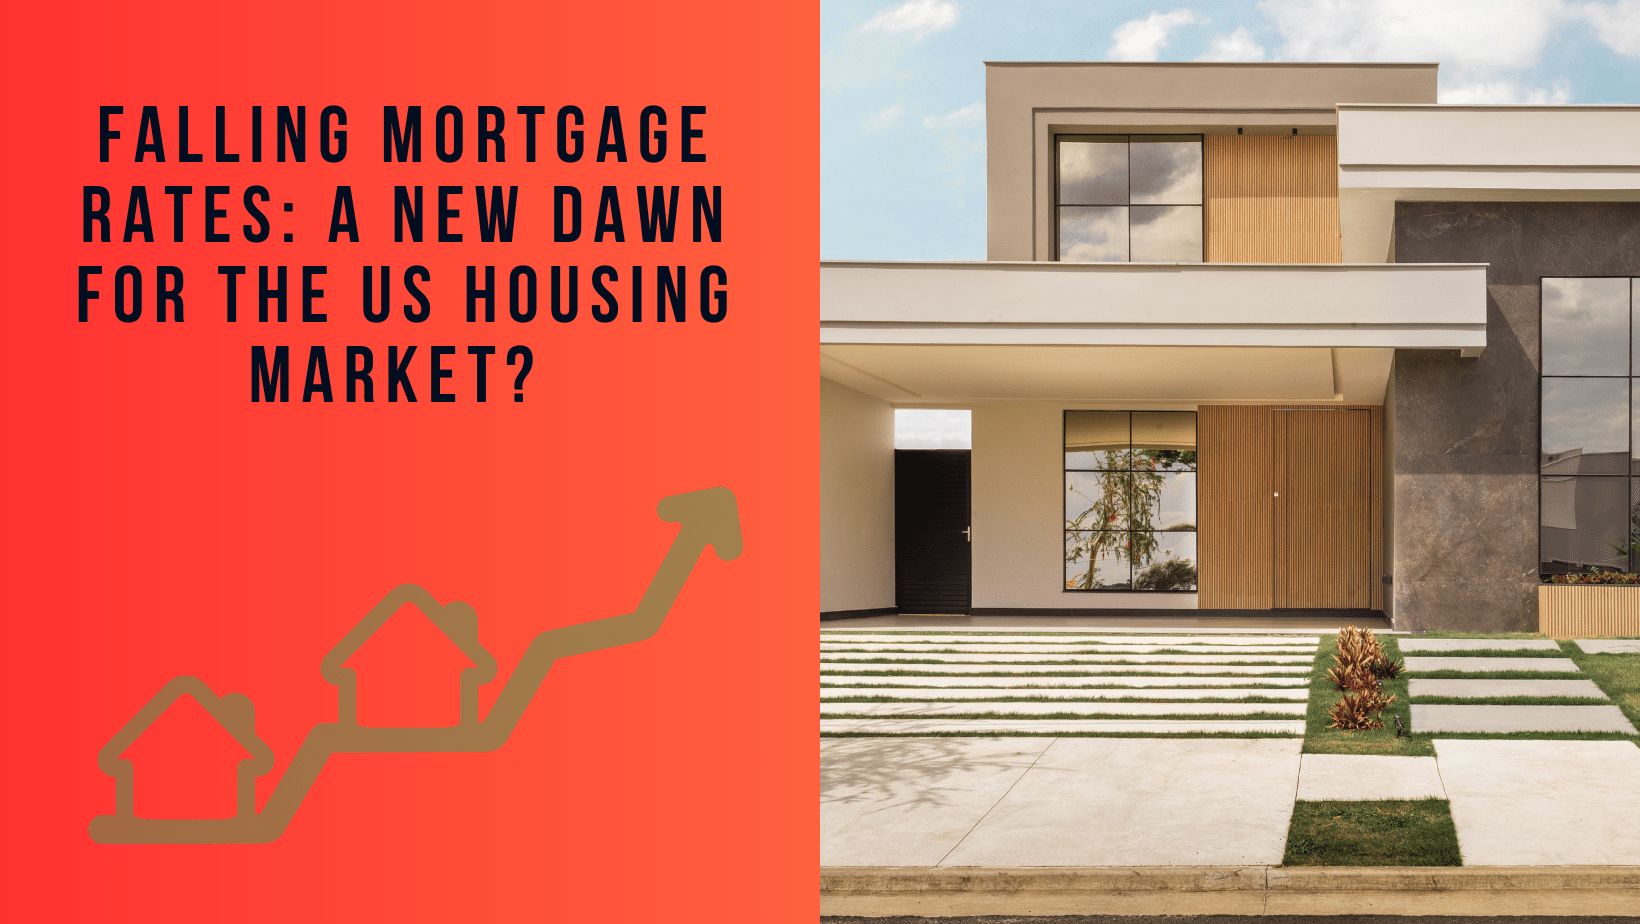 Falling Mortgage Rates A New Dawn for the US Housing Market